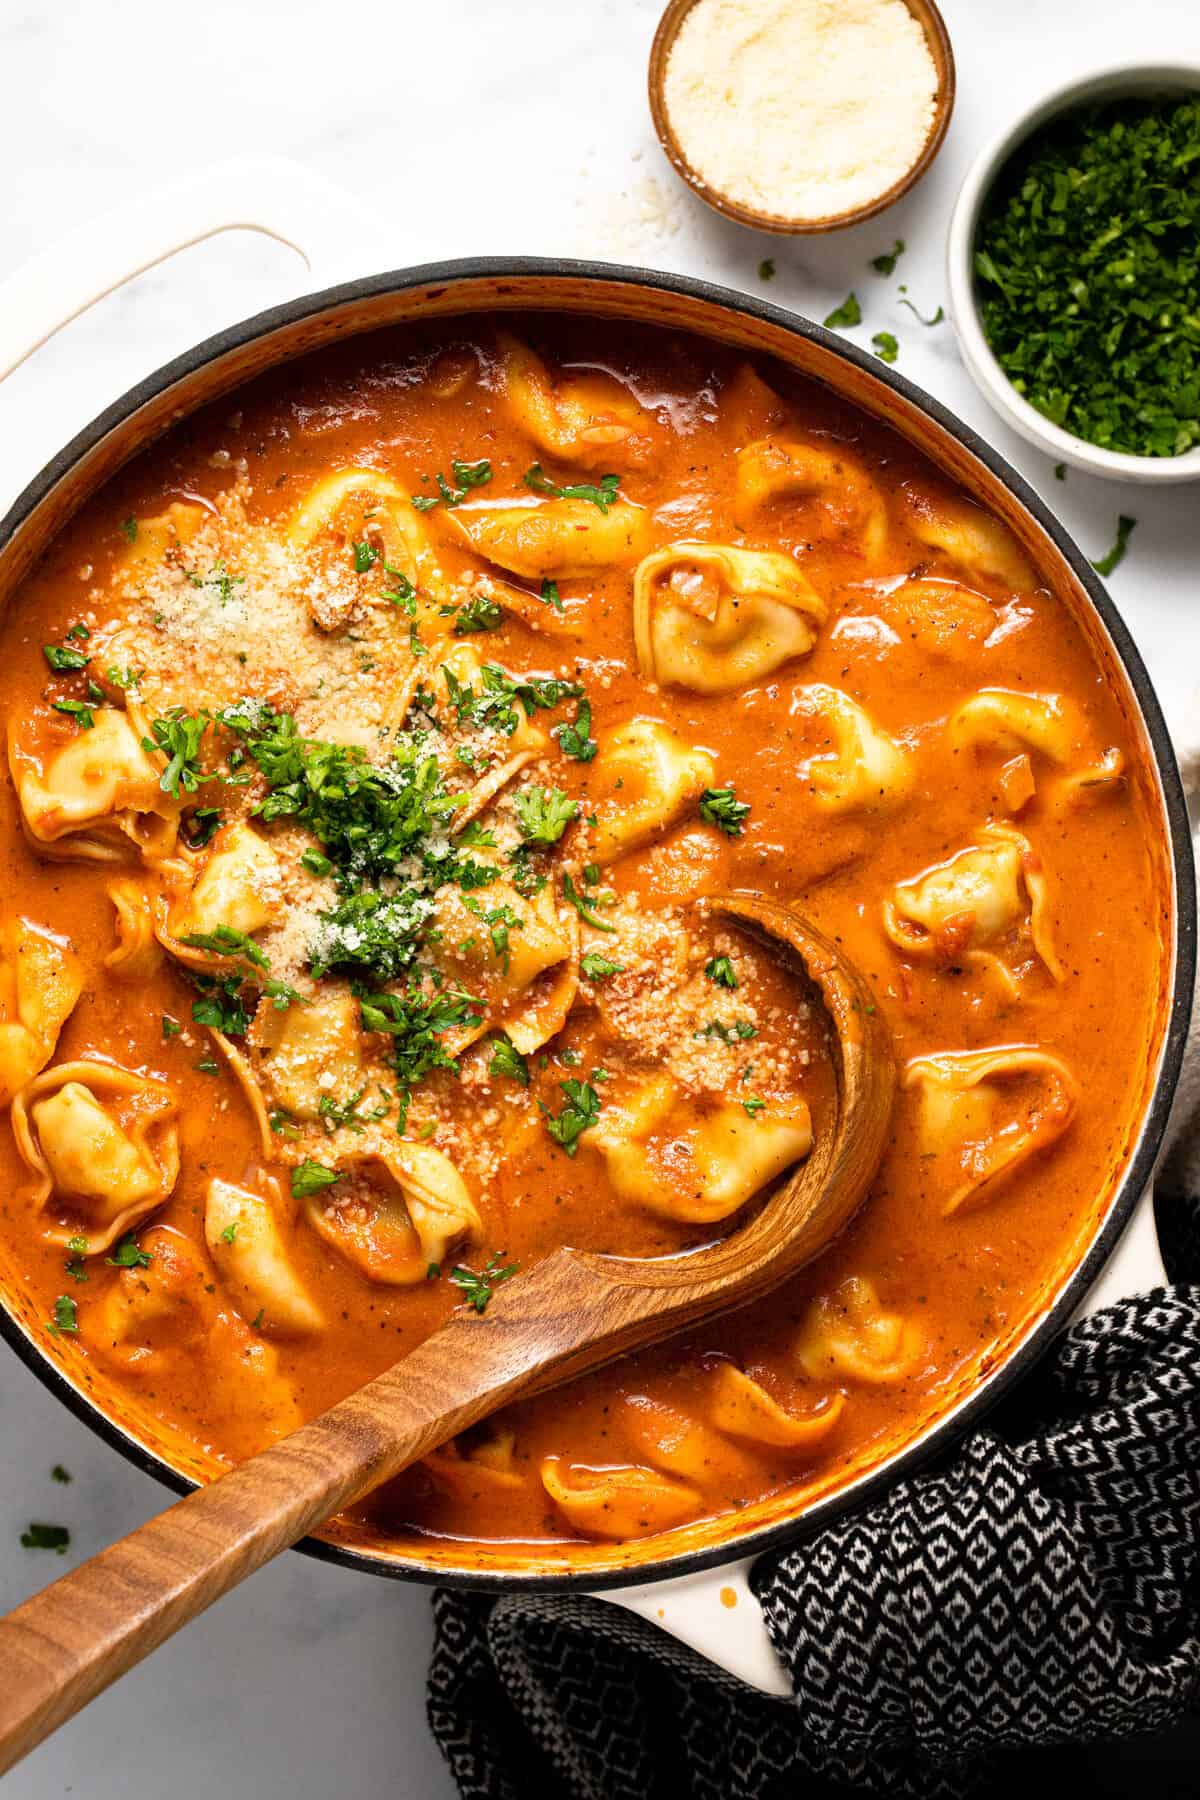 Large white pot filled with homemade tomato tortellini soup garnished with Parmesan